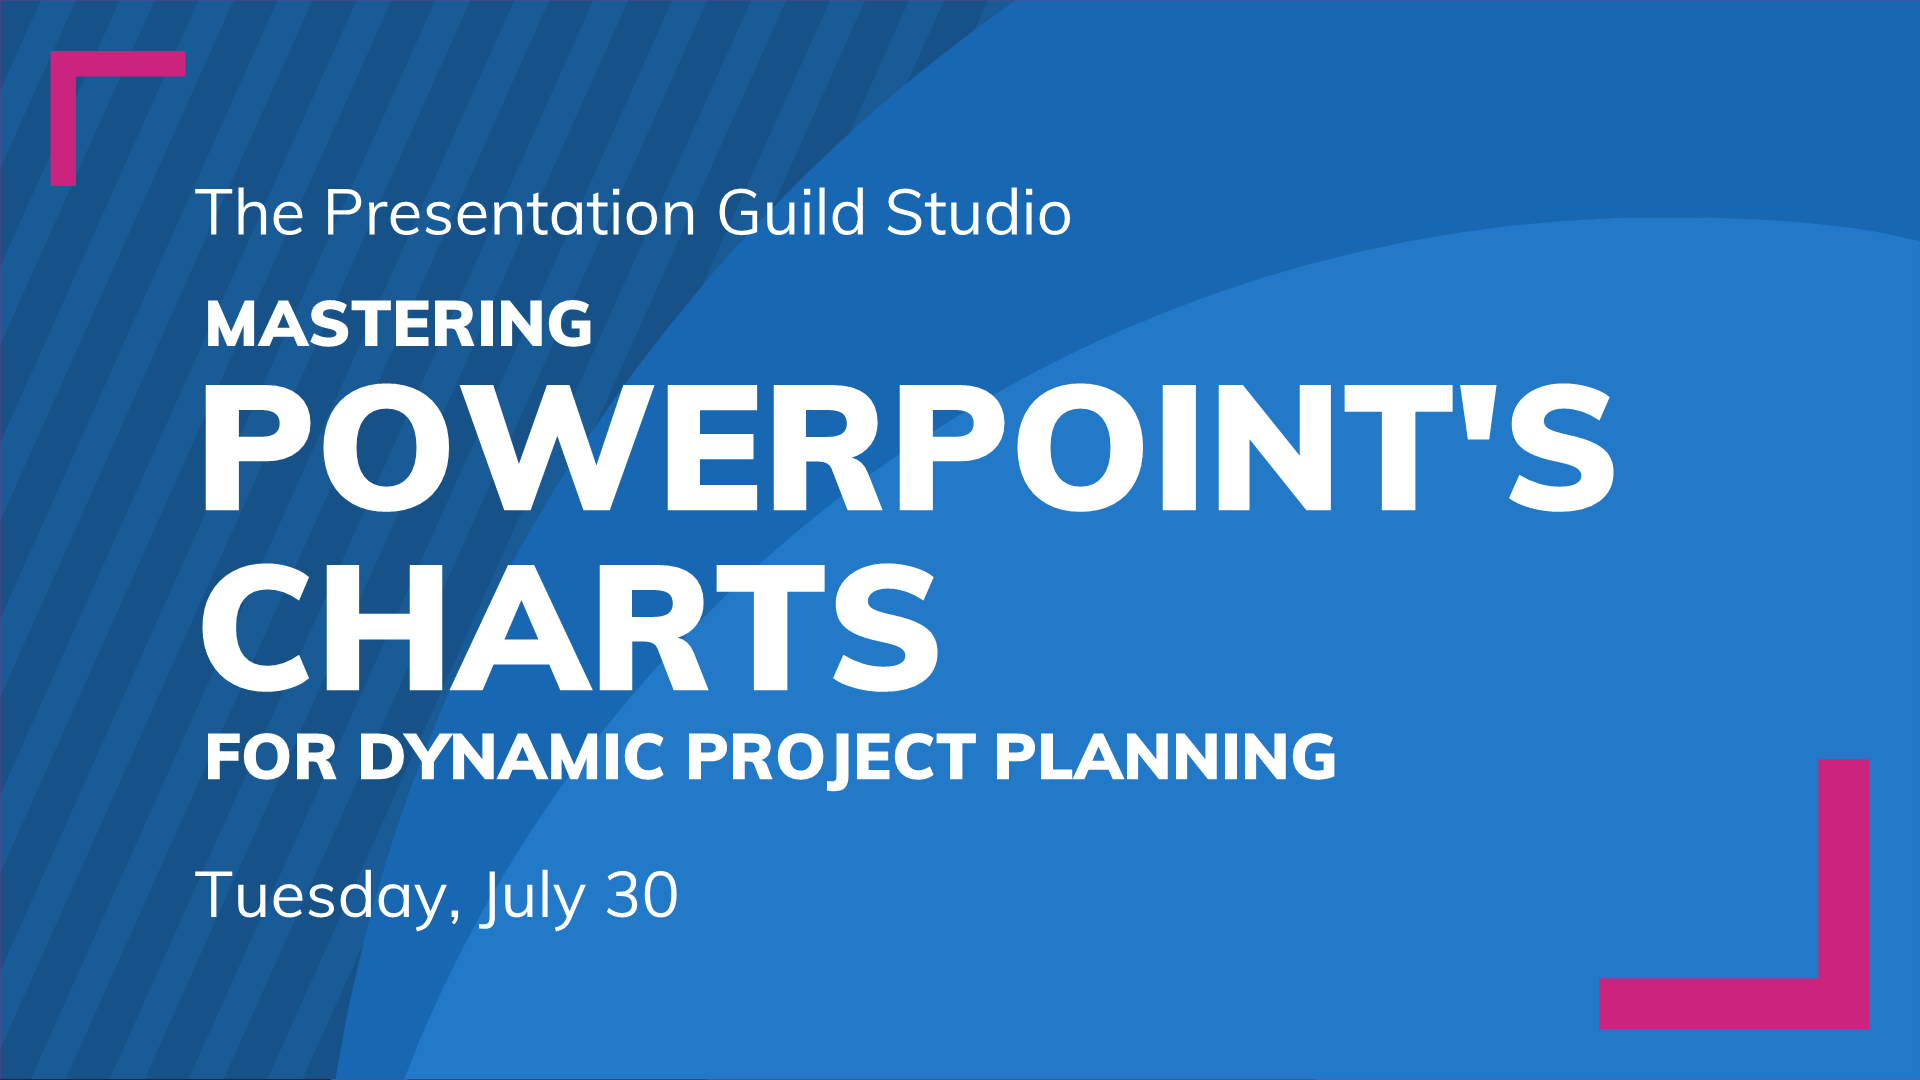 Mastering PowerPoint's Charts: Tuesday July 30